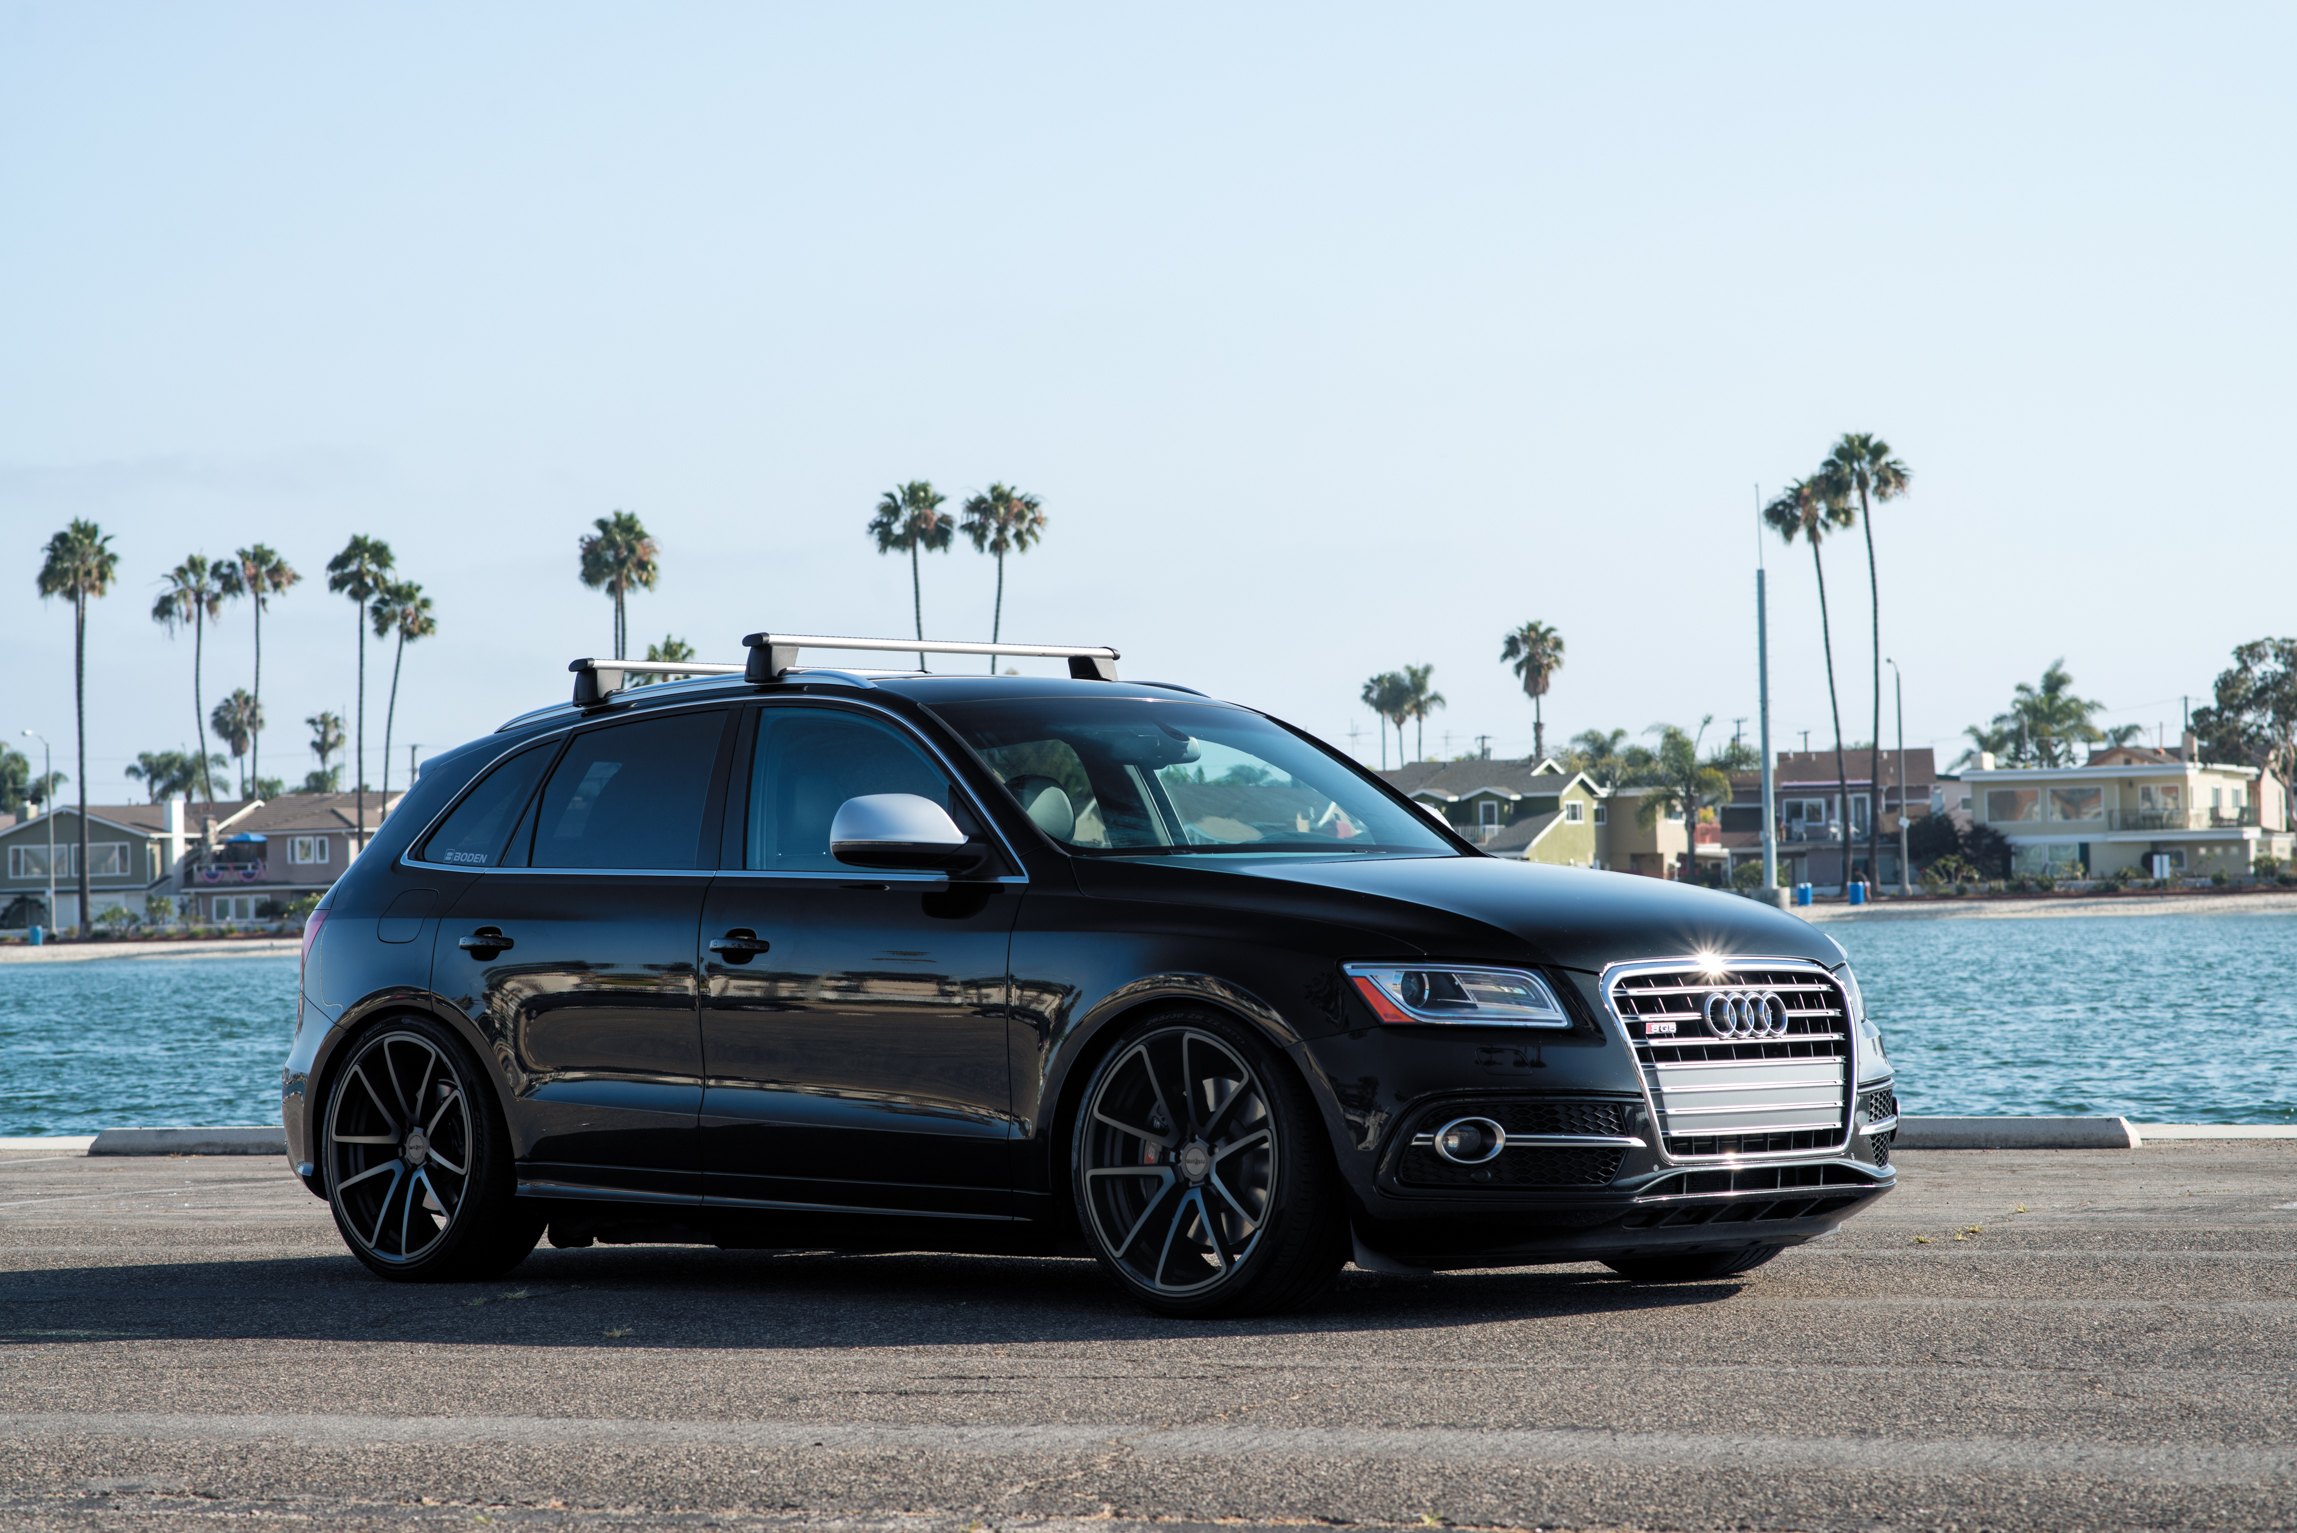 Gloss Black Audi Q5 with Base Rack System - Photo by Rotiform